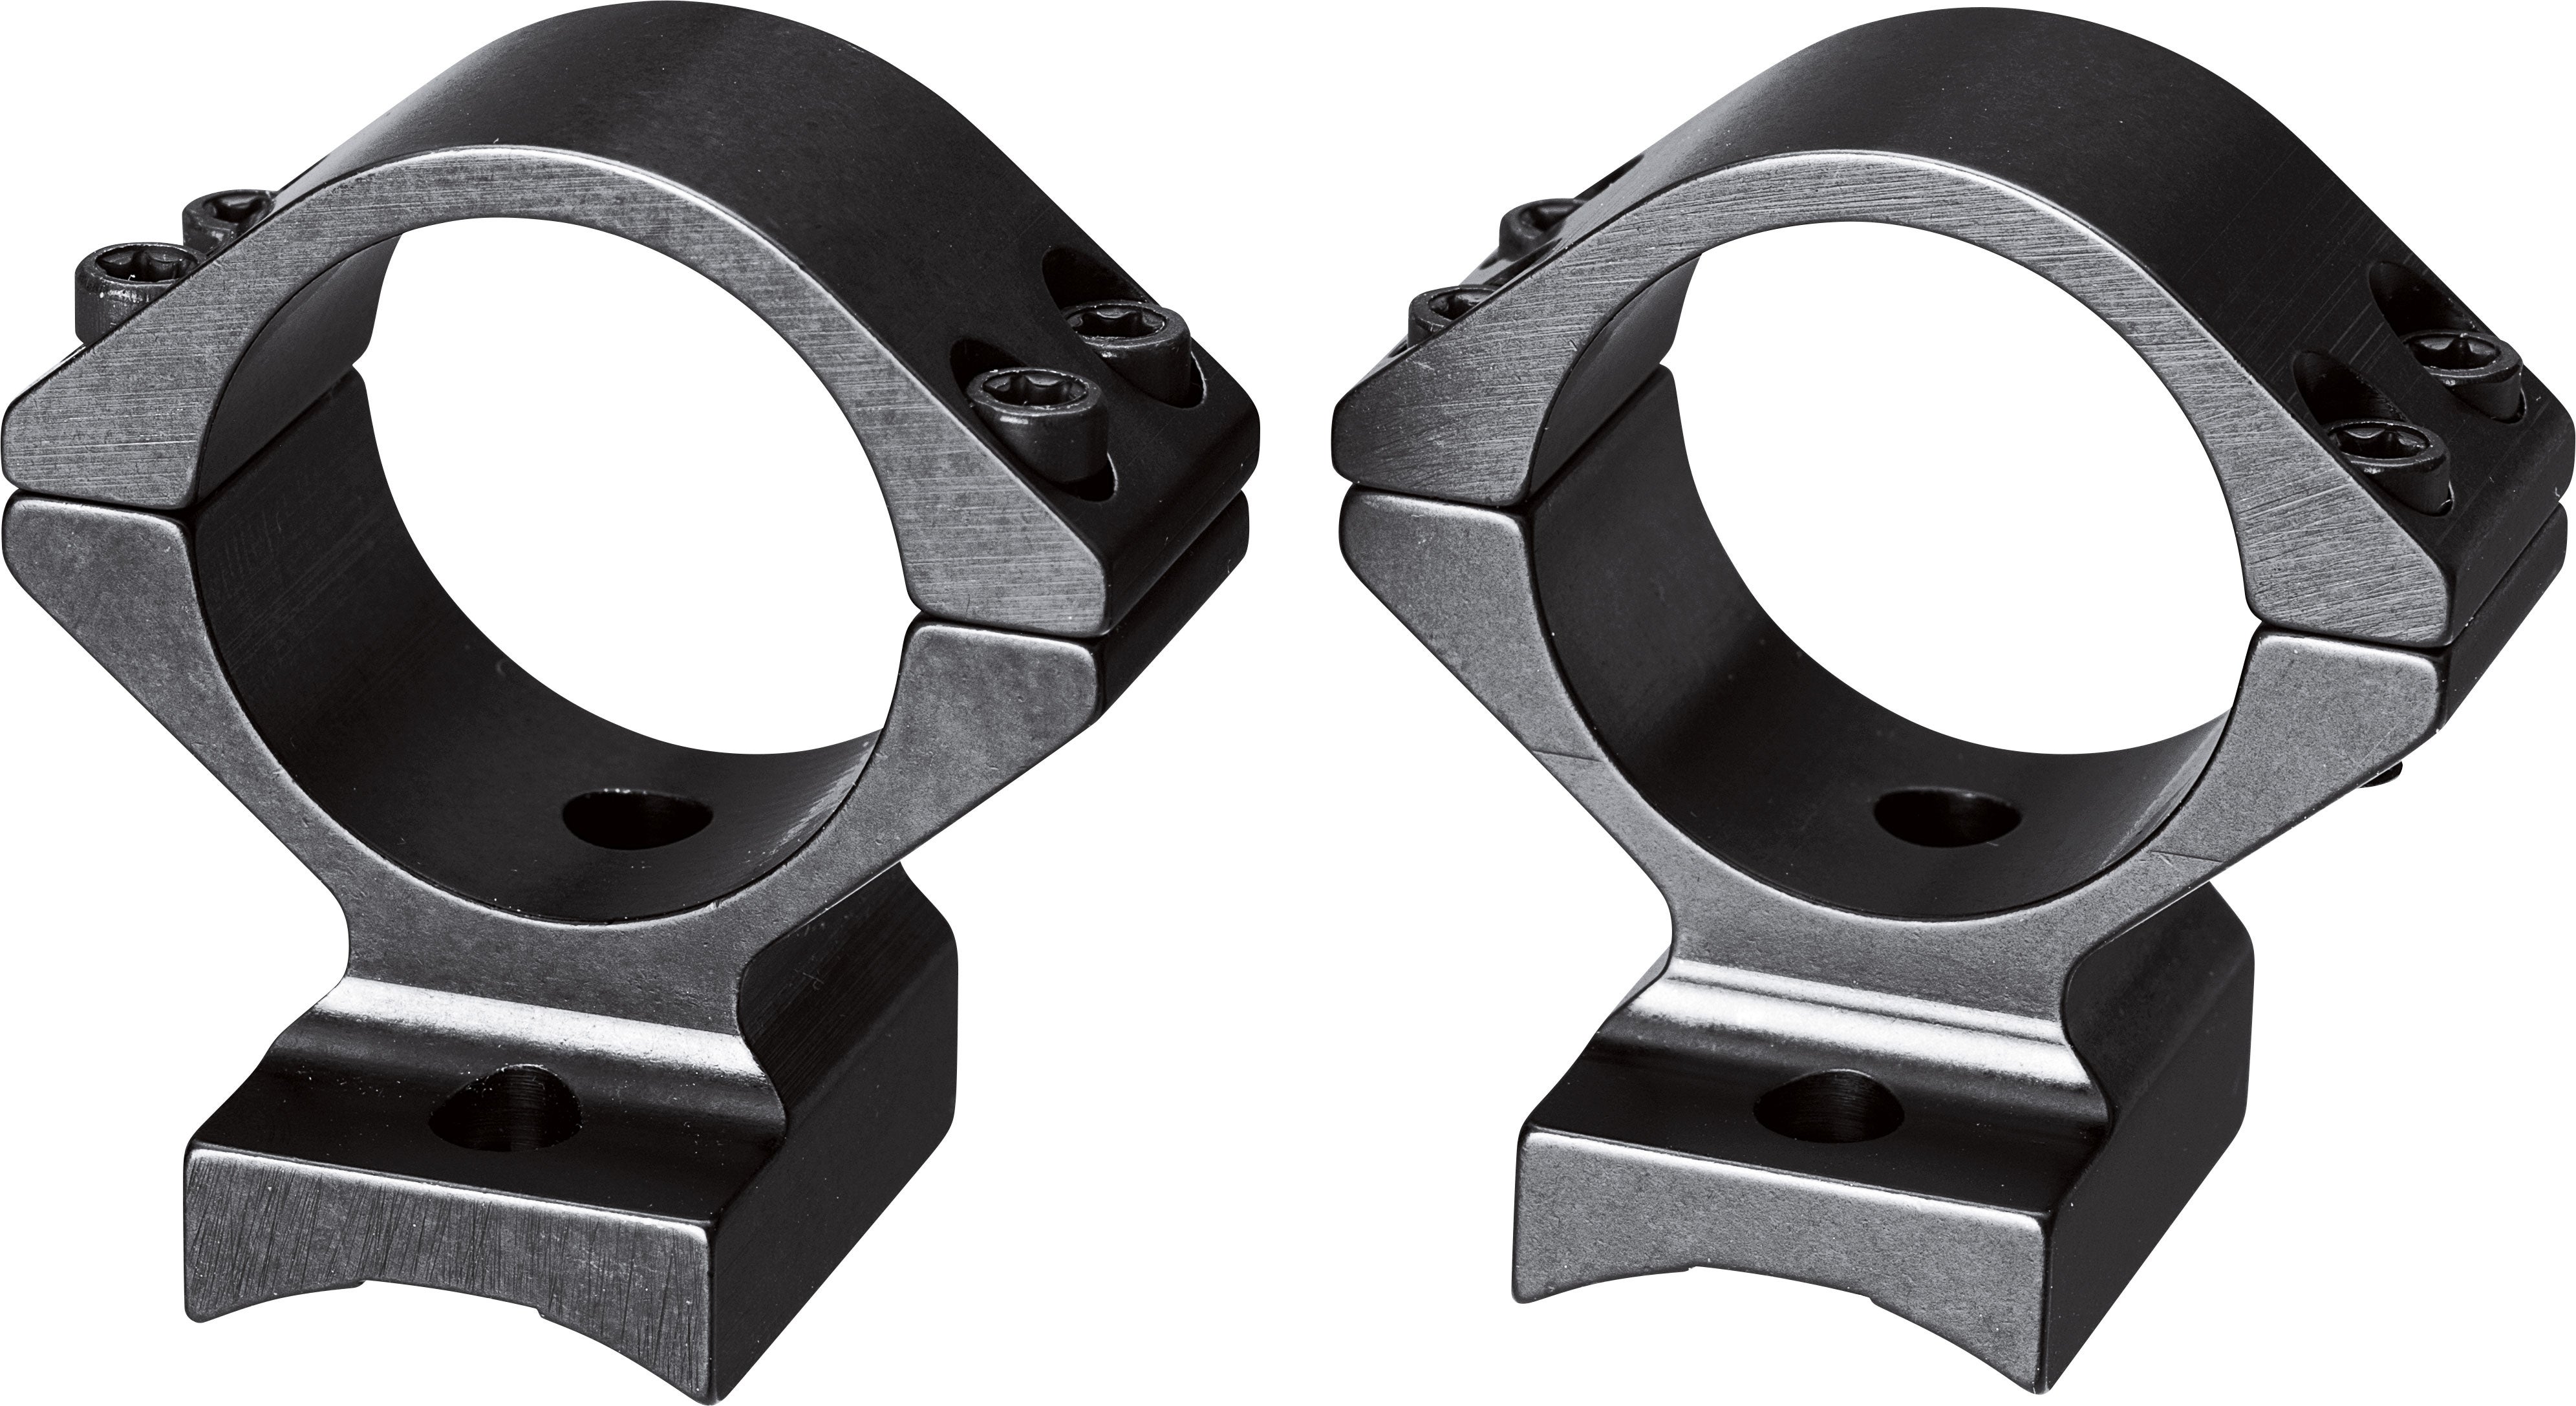 Details about   Millett Scope Mounts Turn-in Style Browning BAR/BLR 1'' High JAN2221.02.003 